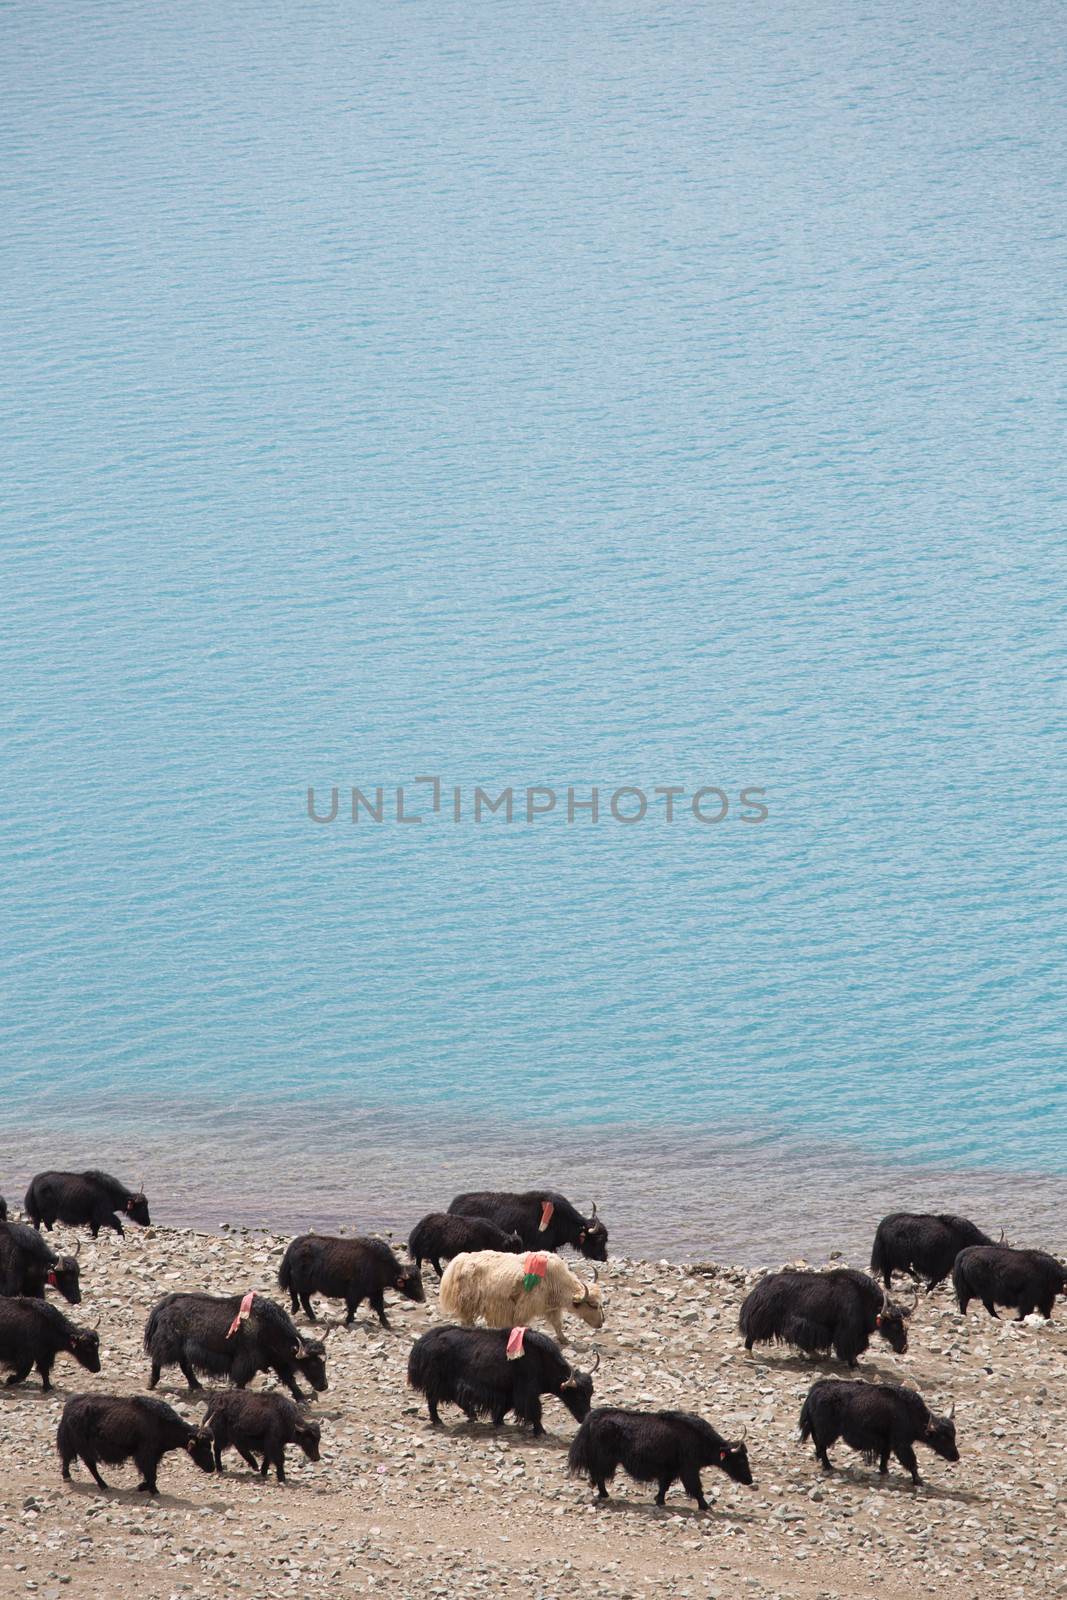 Road of the Friendship, Yaks at the Namtso Lake in Tibet, China